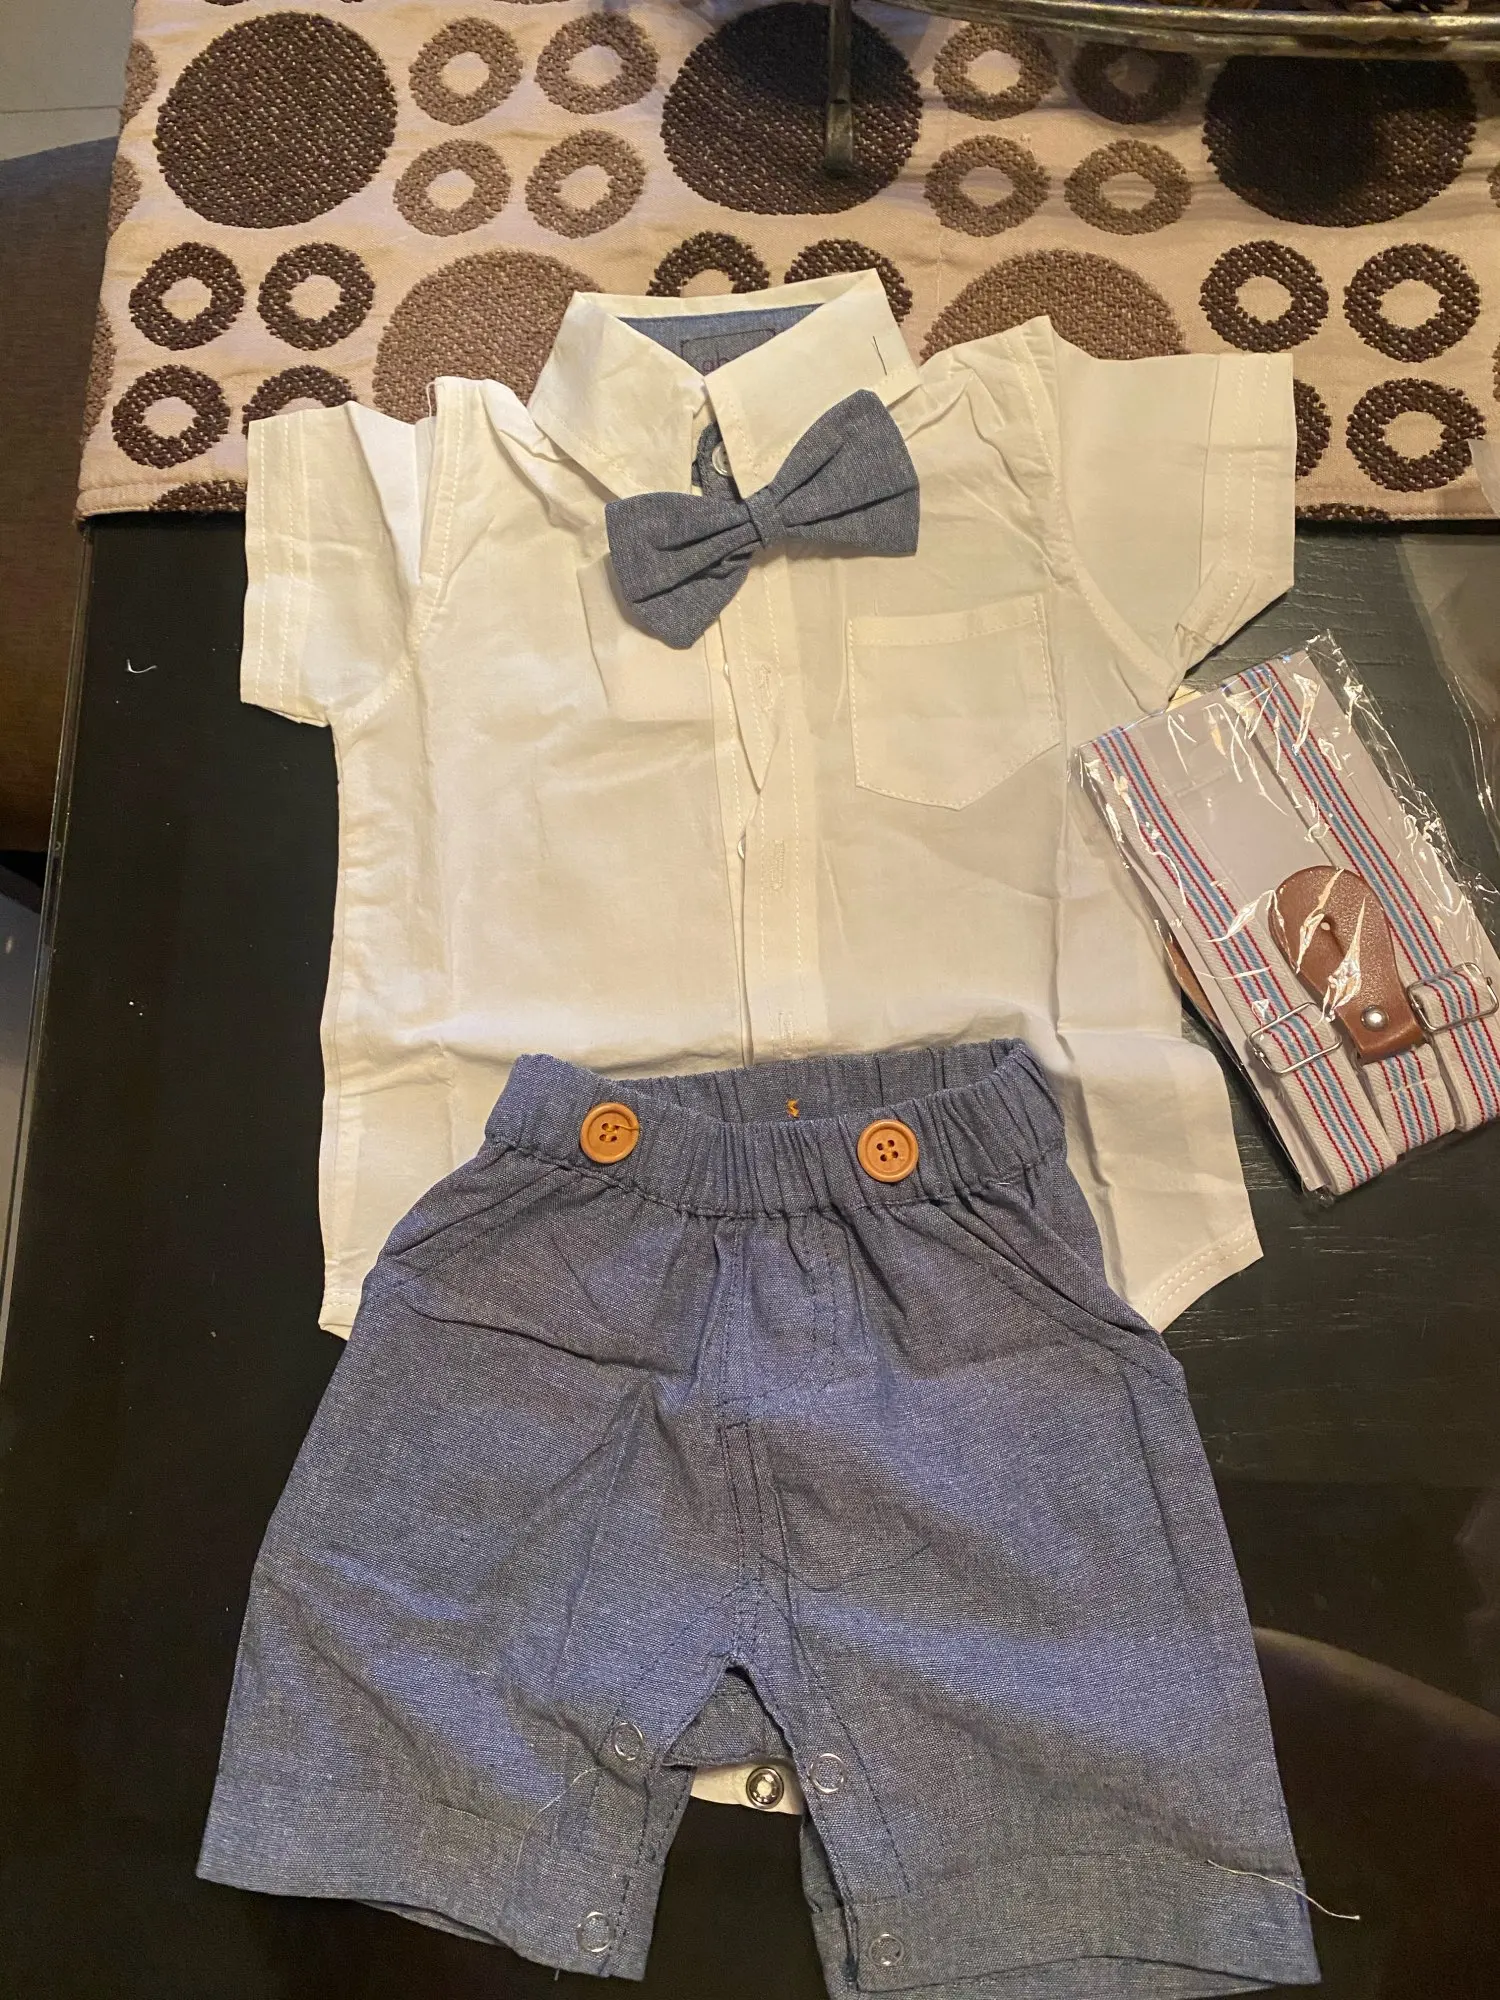 Suspenders Pants Outfits Moyikiss Studio Toddler Dress Suit Baby Boys Gentleman Clothes Sets Bow Ties Shirts 